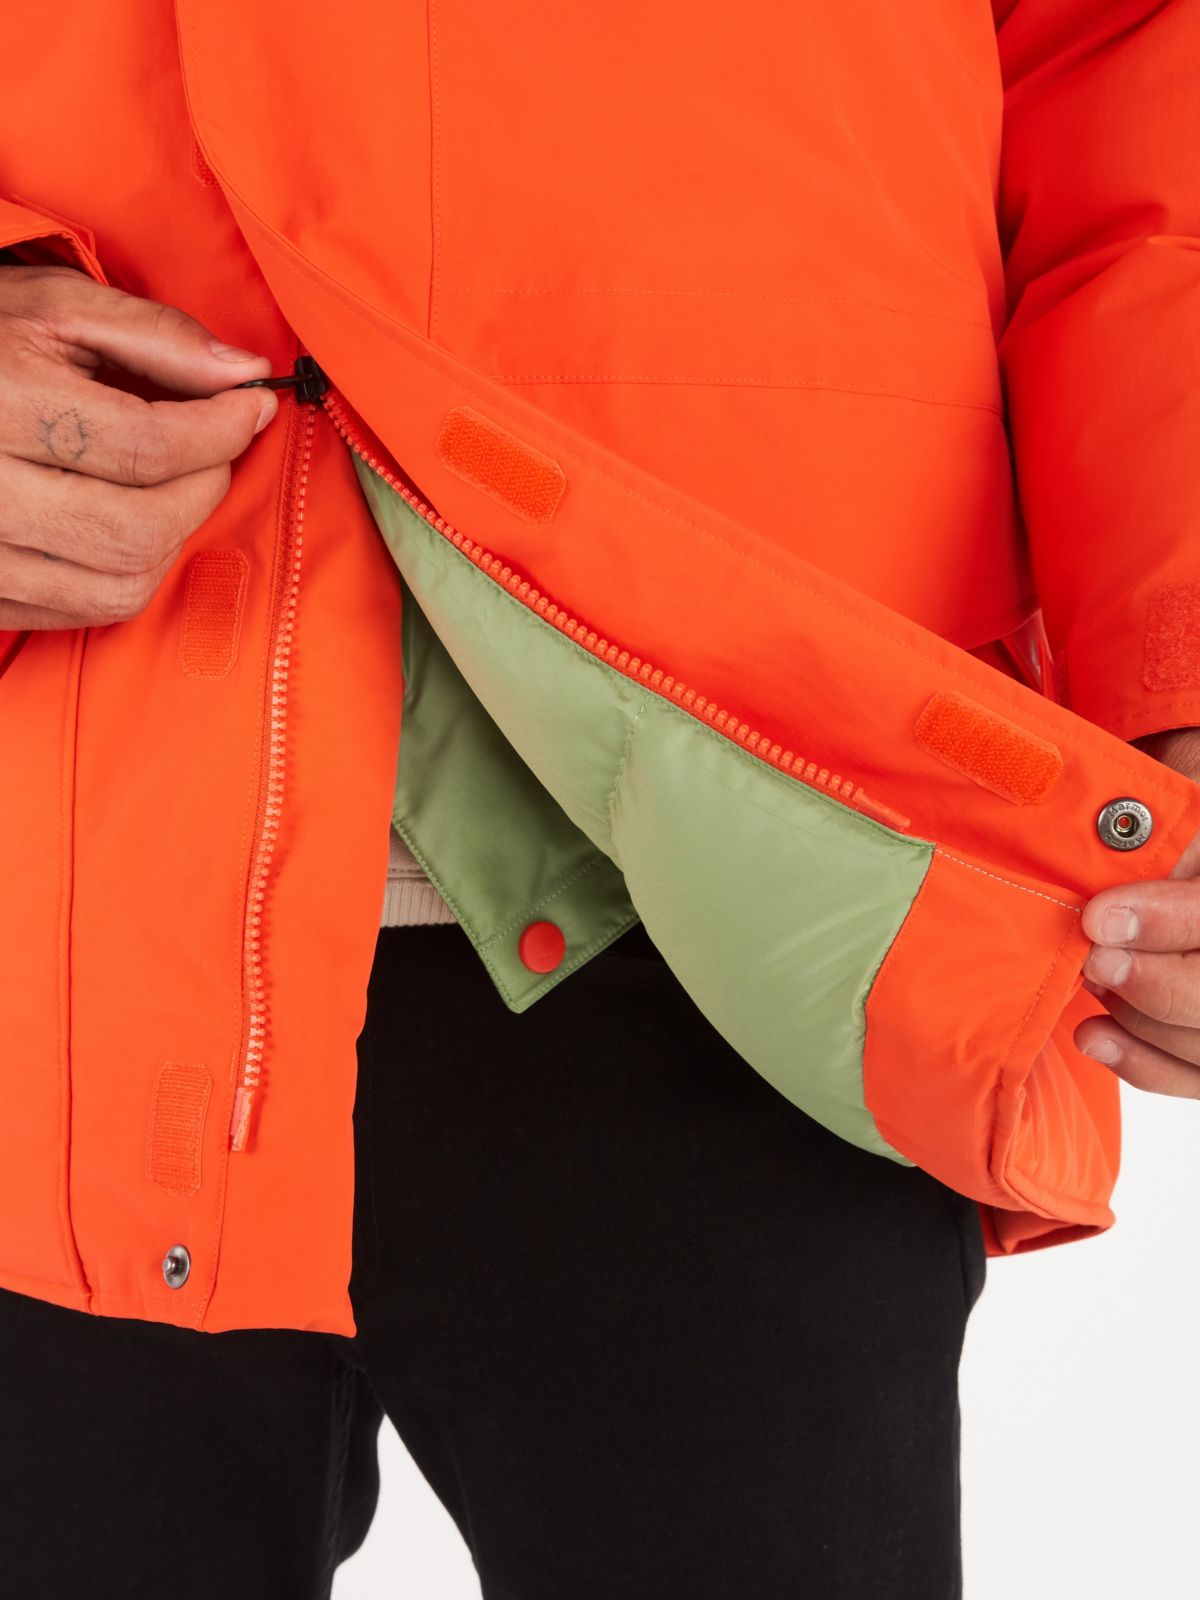 Person unzipping bottom portion of coat